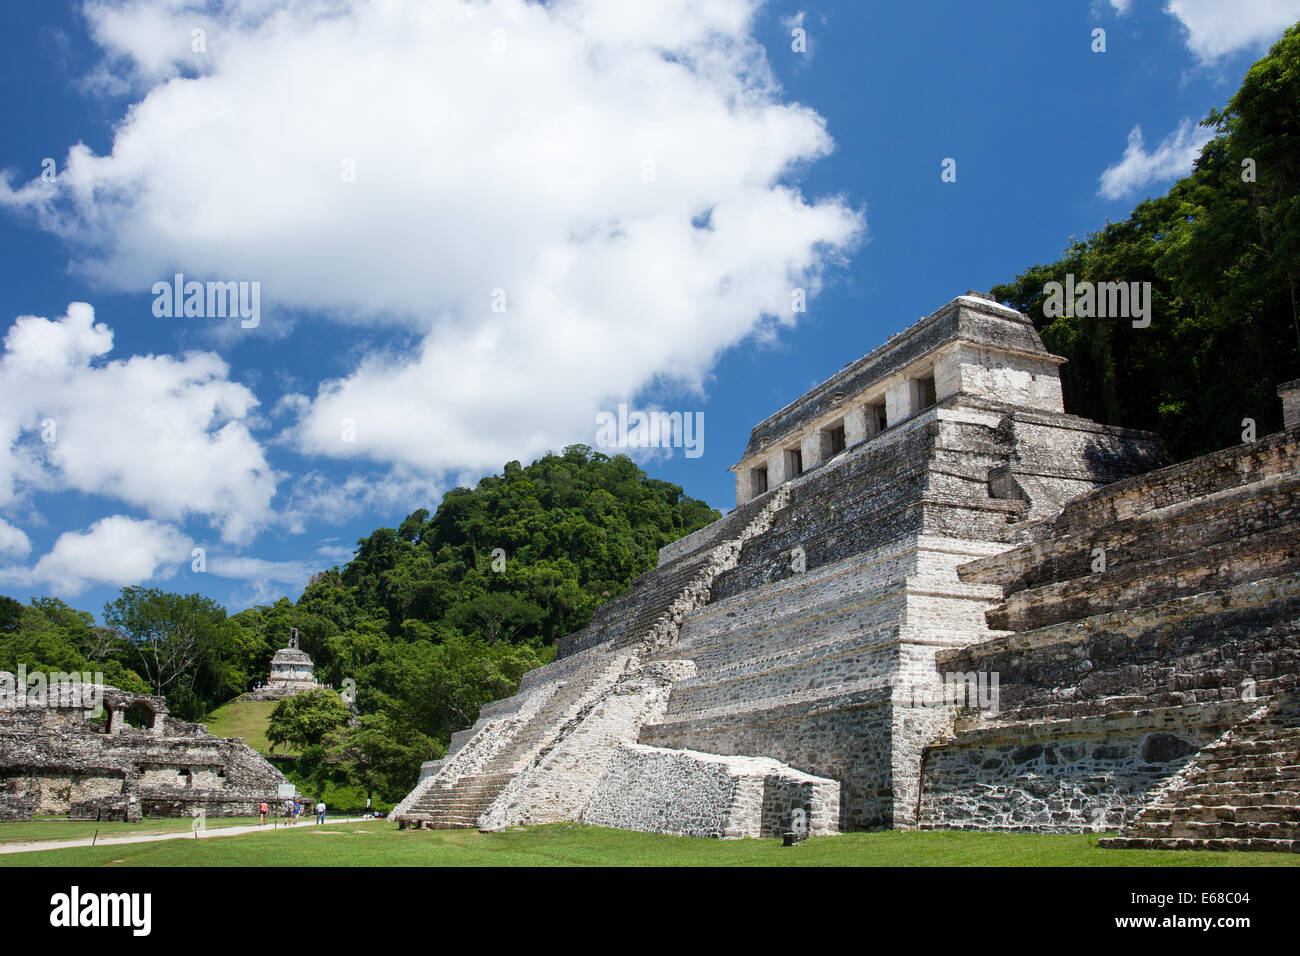 Temple of the Inscriptions with Temple of the Cross in the background at the Mayan ruins of Palenque, Chiapas, Mexico. Stock Photo